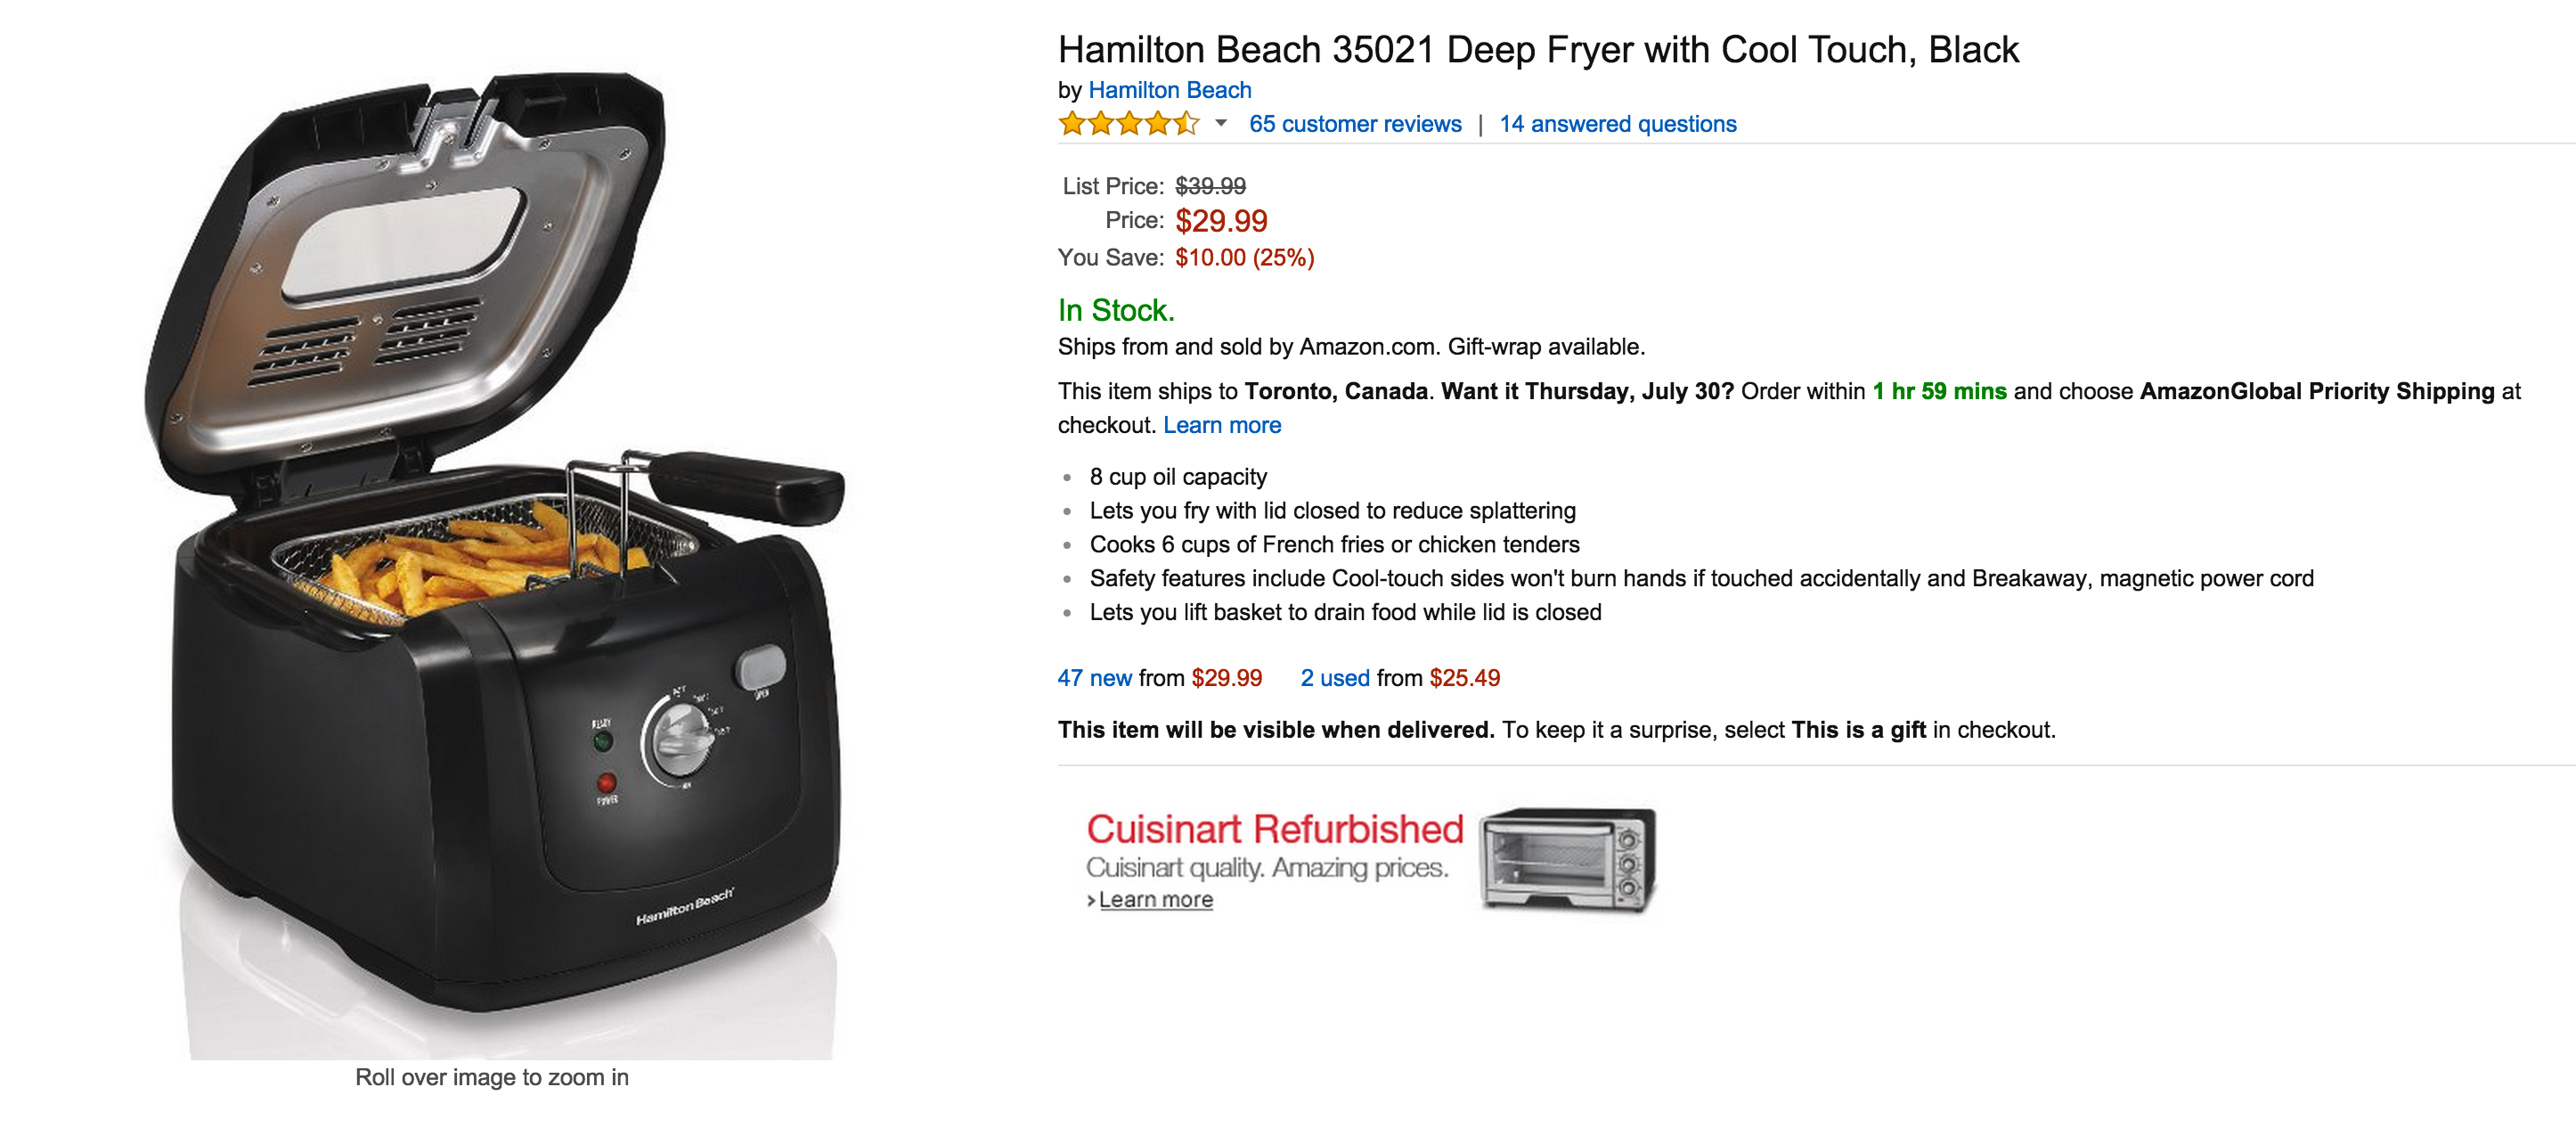 https://9to5toys.com/wp-content/uploads/sites/5/2015/07/hamilton-beach-deep-fryer-with-cool-touch-35021-sale-02.png